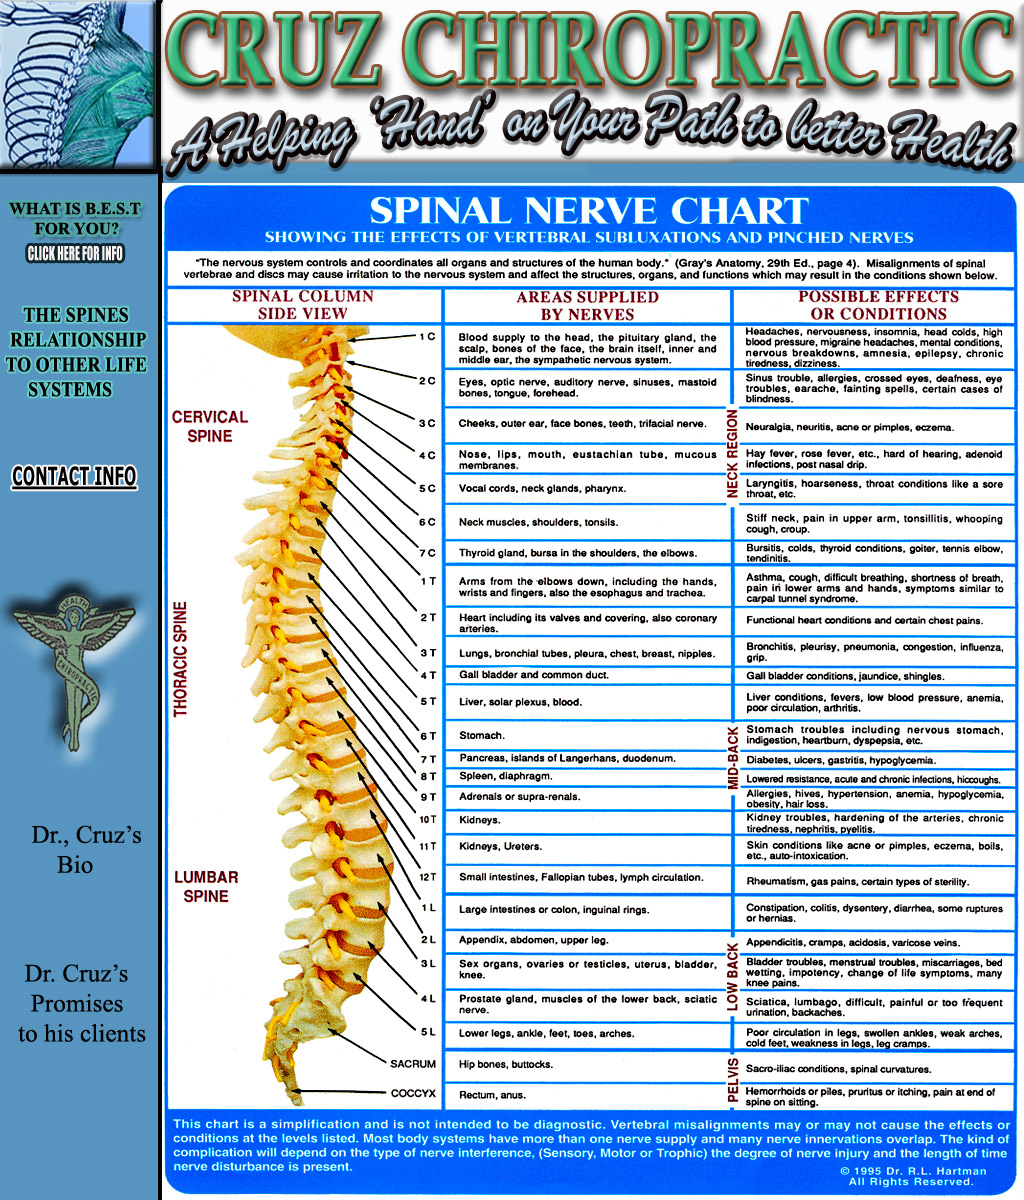 Spinal Relationship to other life forces